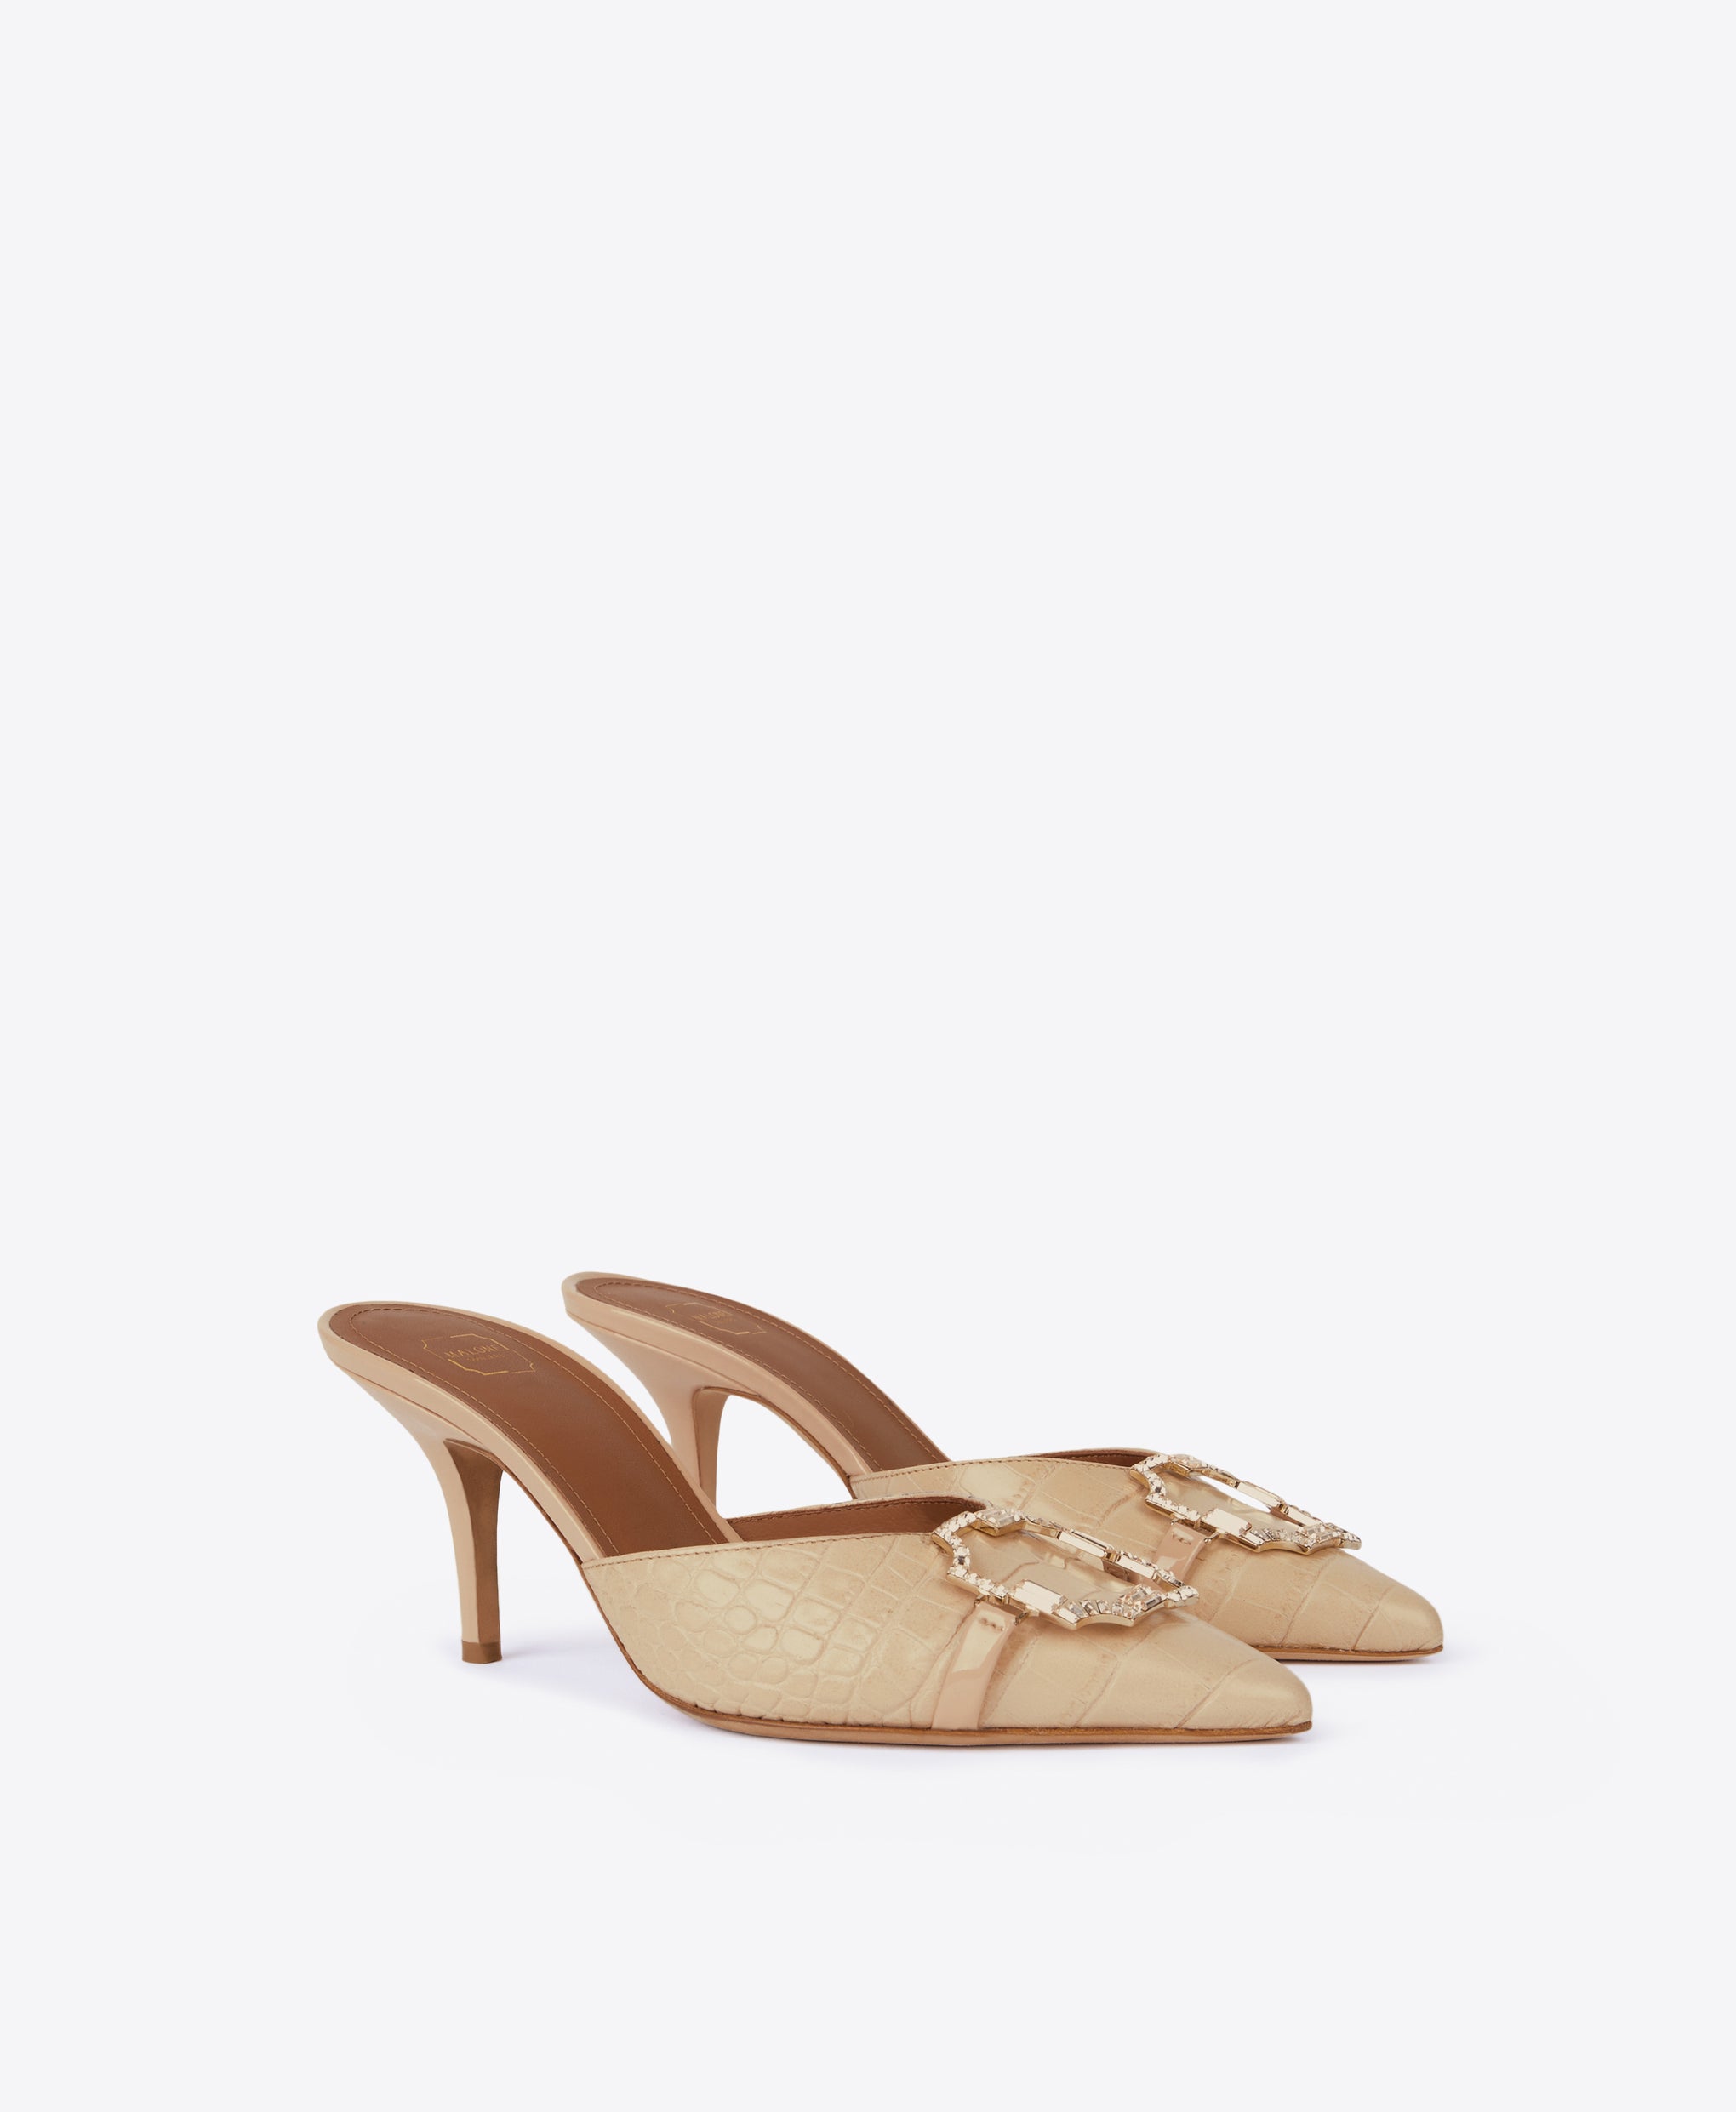 Women's Nude Croc Embossed Stiletto Mules Malone Souliers